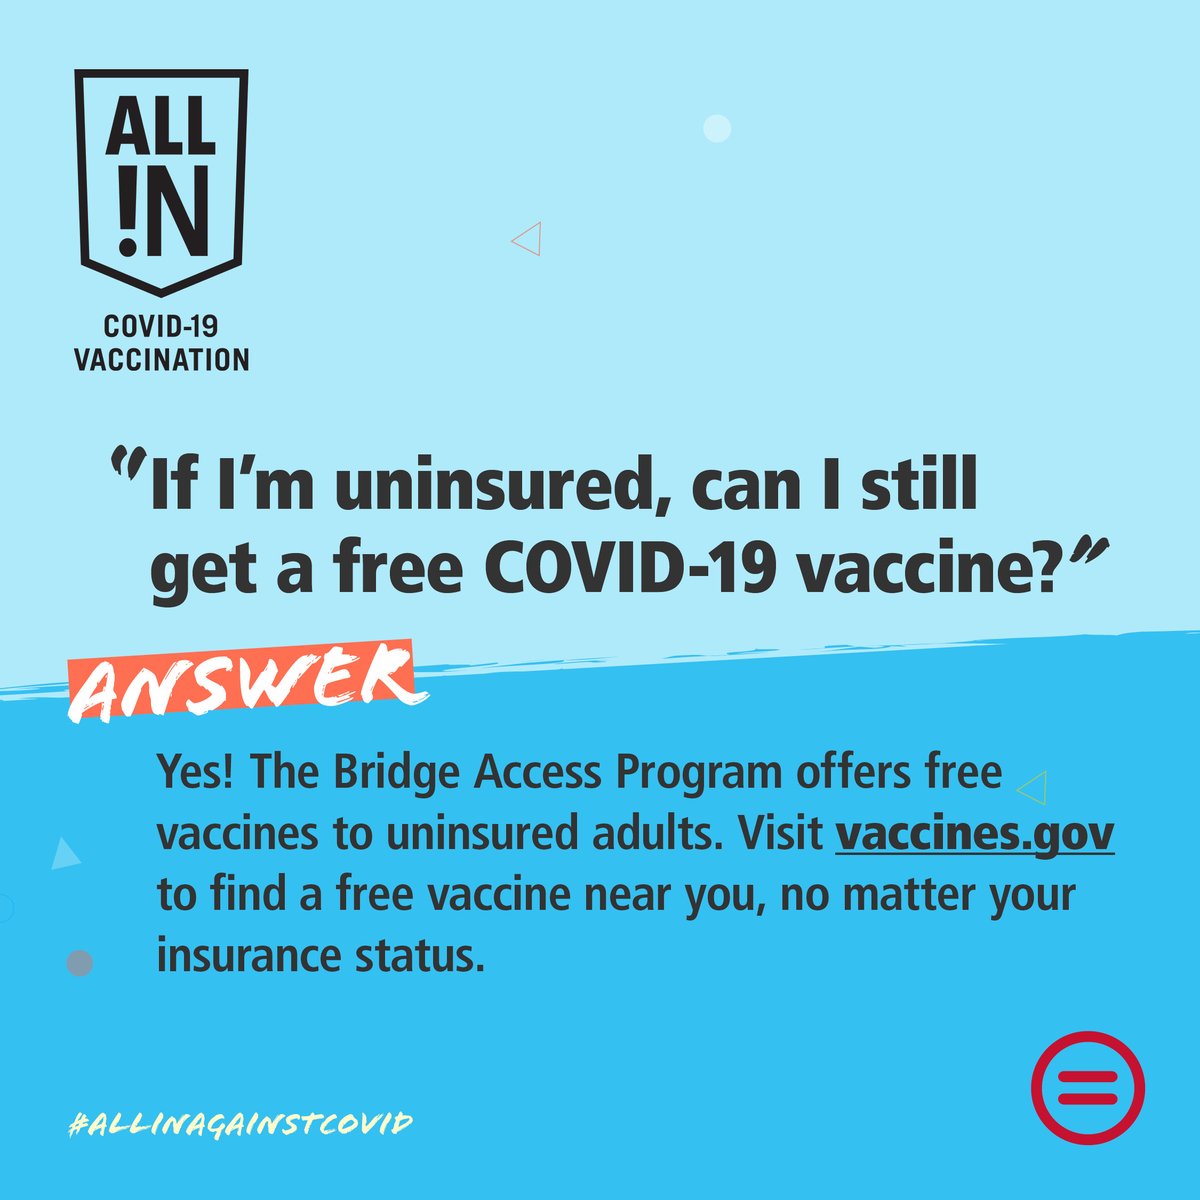 Uninsured? No problem! Get vaxxed today for free through the Bridge Access Program. Visit vaccines.gov or call 1-800-232-0233 for locations near you. #AllinAgainstCOVID